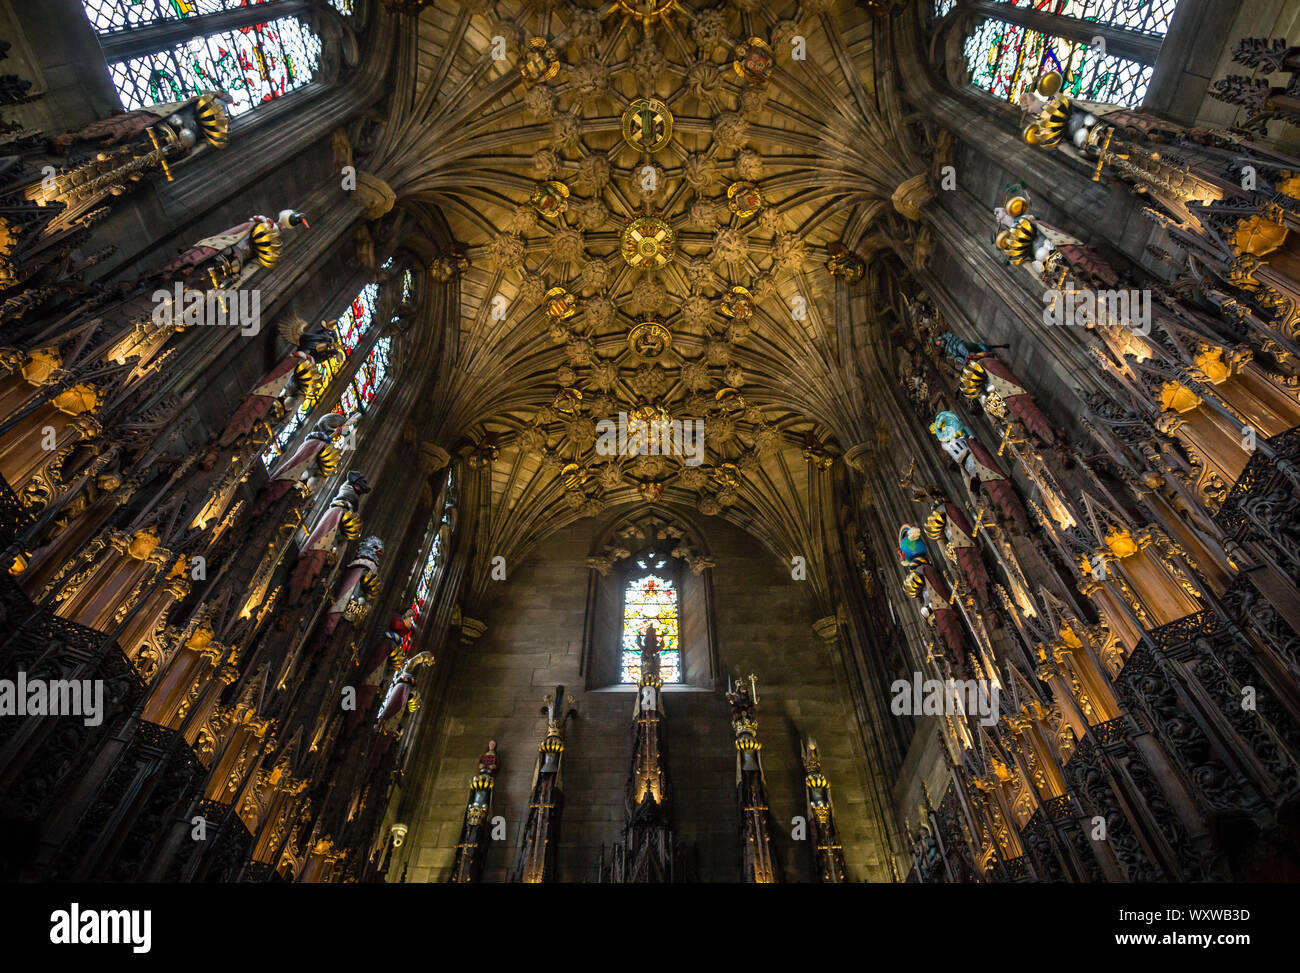 The interior and ceiling of the Thistle Chapel of St Giles Cathedral, Edinburgh, Scotland. Stock Photo